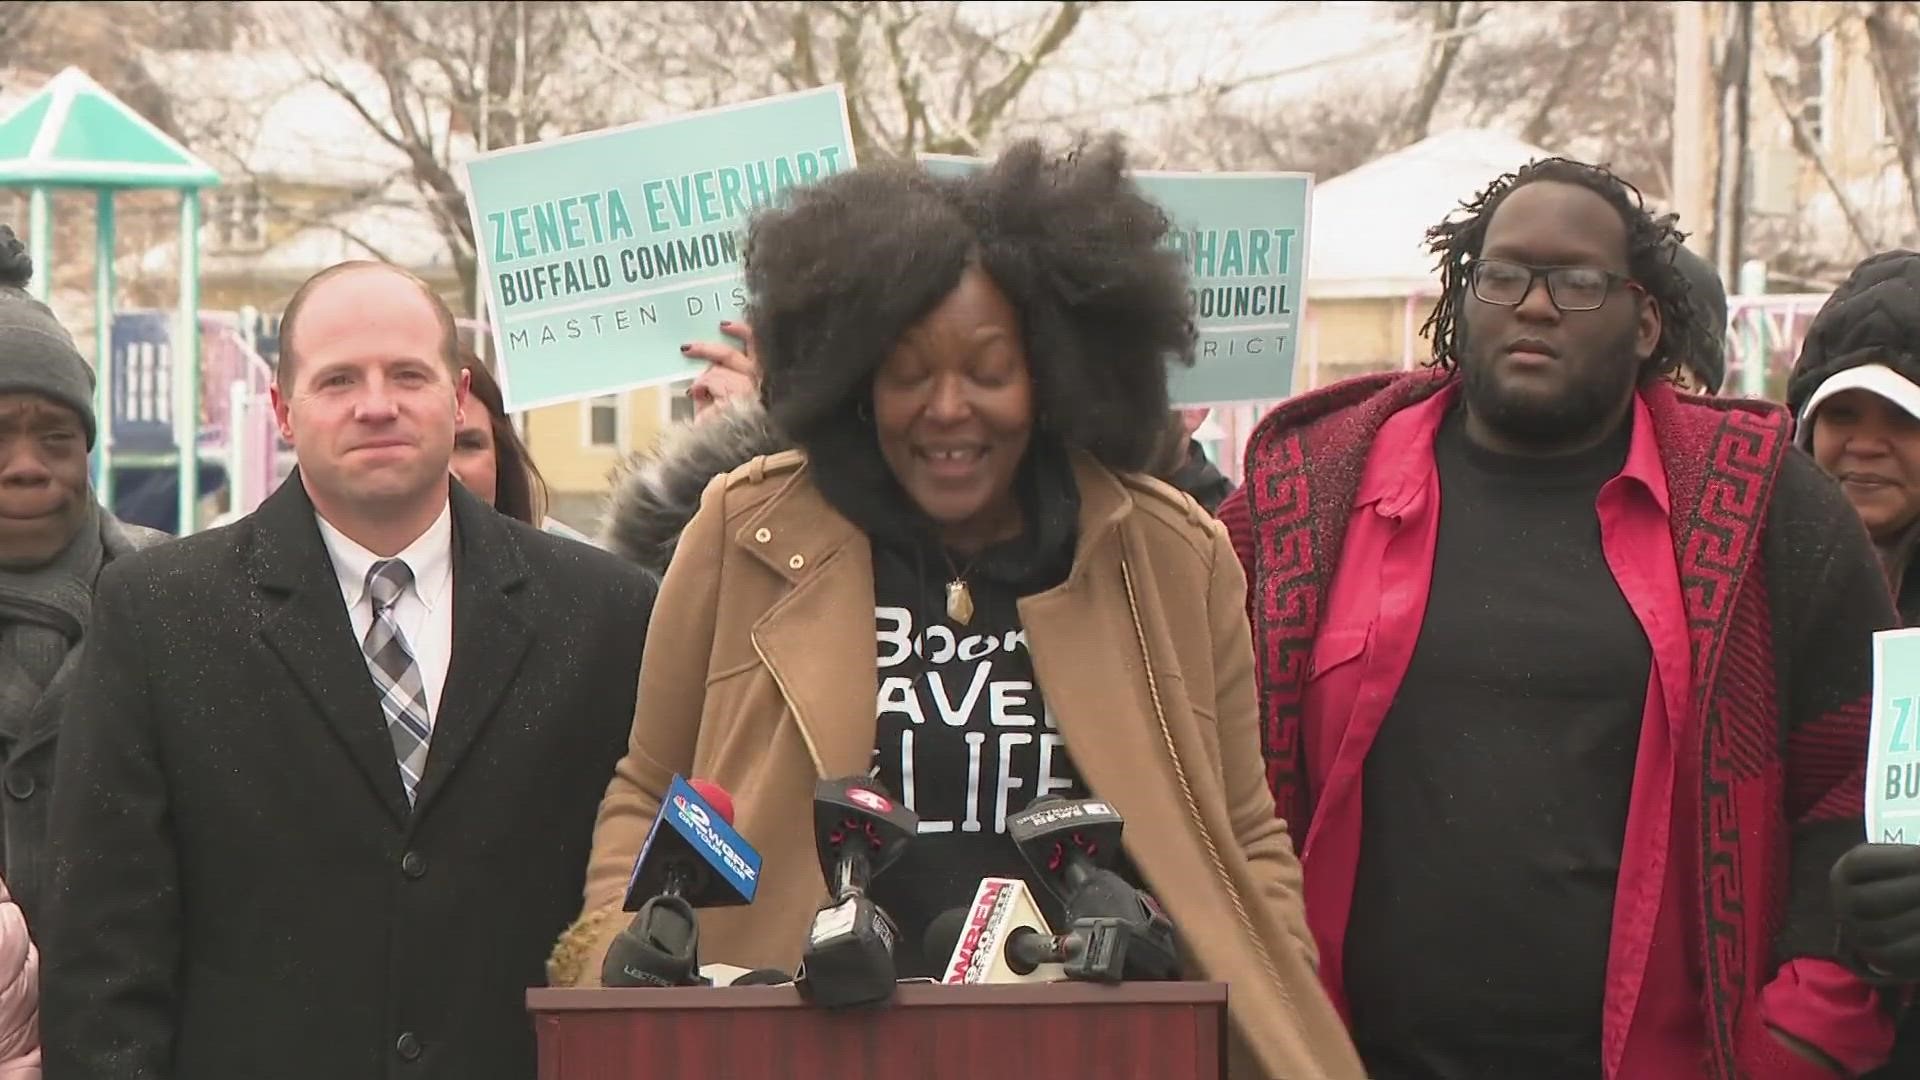 EVERHART IS THE MOTHER OF ZAIRE GOODMAN, THE 20-YEAR-OLD WHO WAS SHOT BUT SURVIVED THE TOPS MASS SHOOTING.